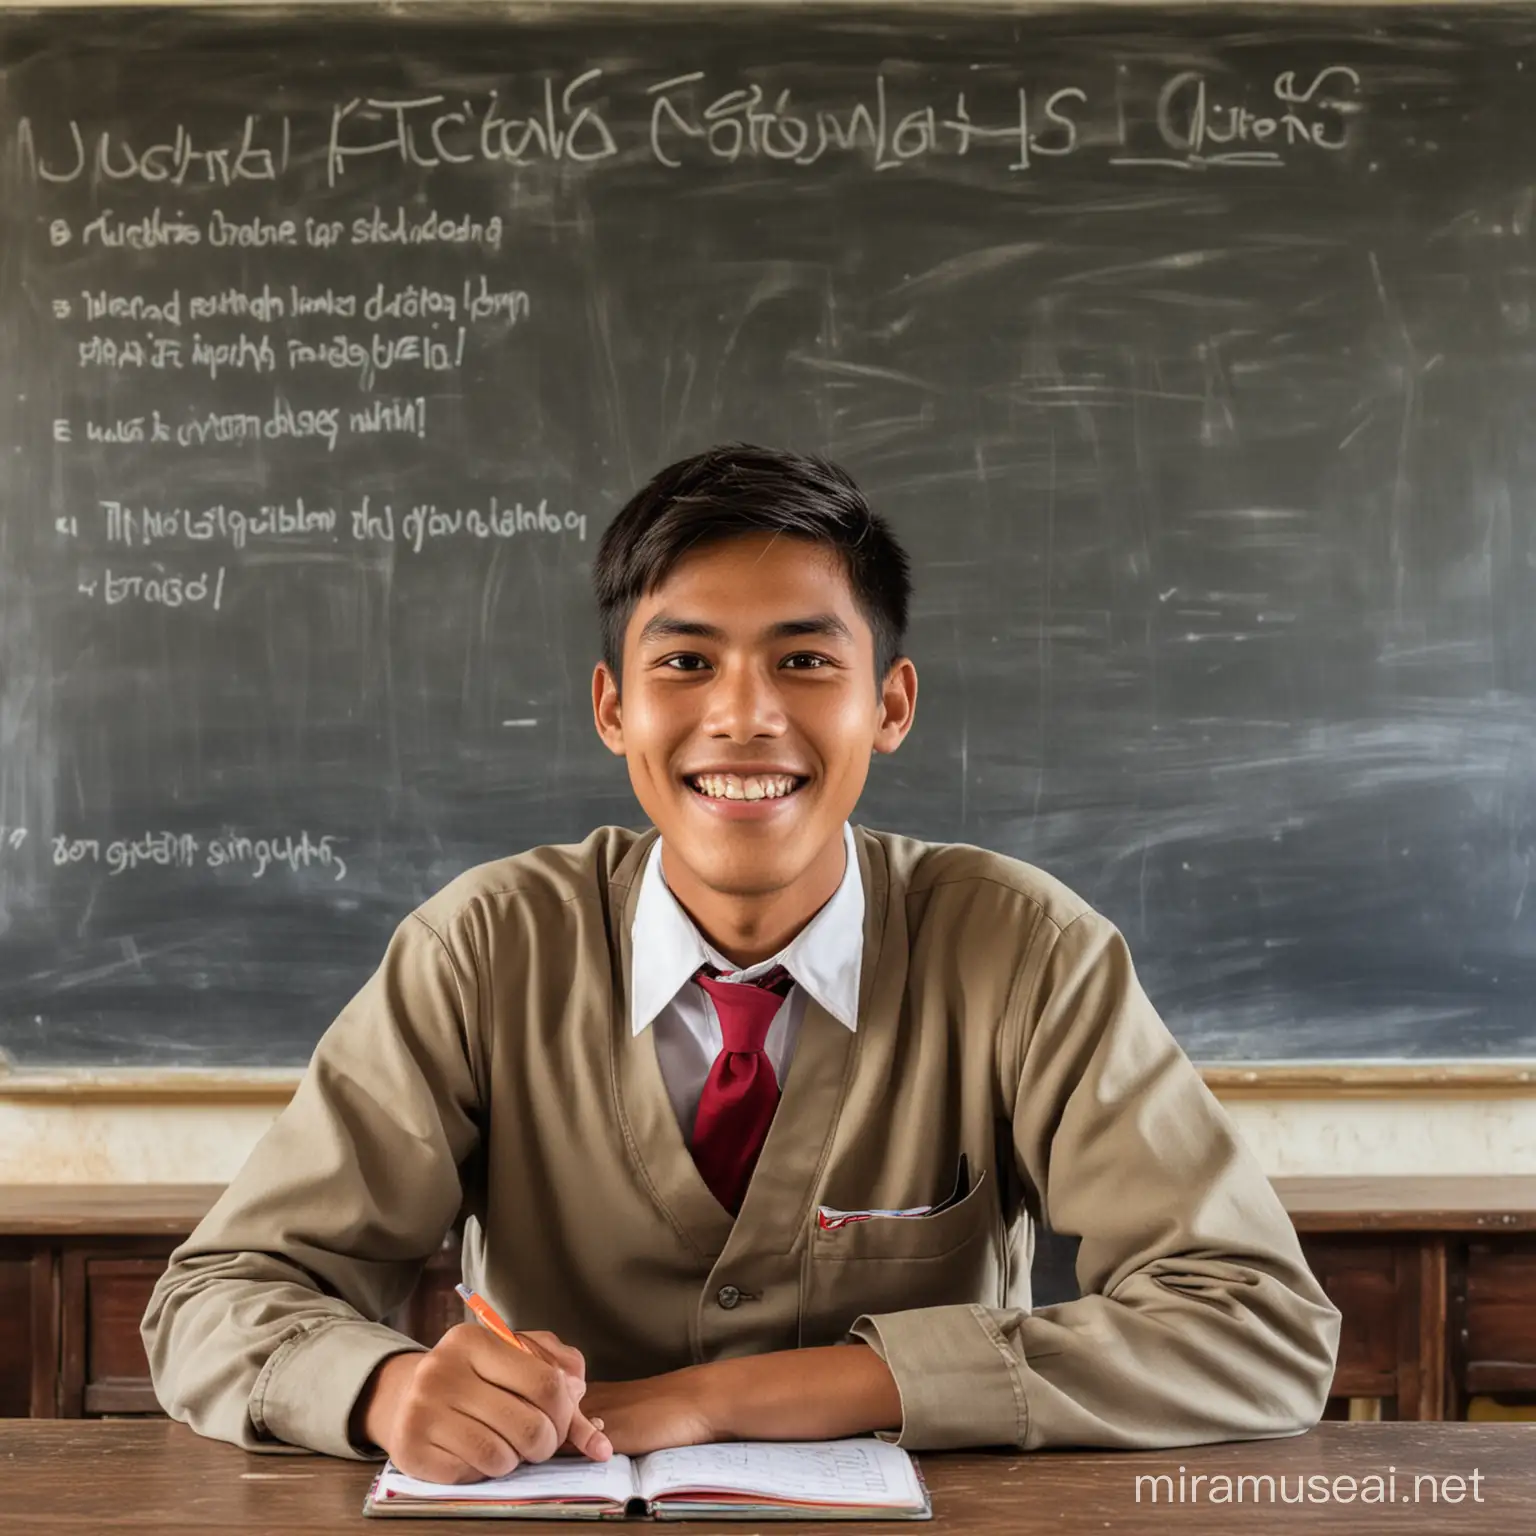 Myanmar high school male student In a high school uniform from Myanmar, sitting at a study table in a classroom. Sitting with a silly smile, showing off his teeth and dimples to the camera. On the back is a picture of a blackboard in a classroom in the country.